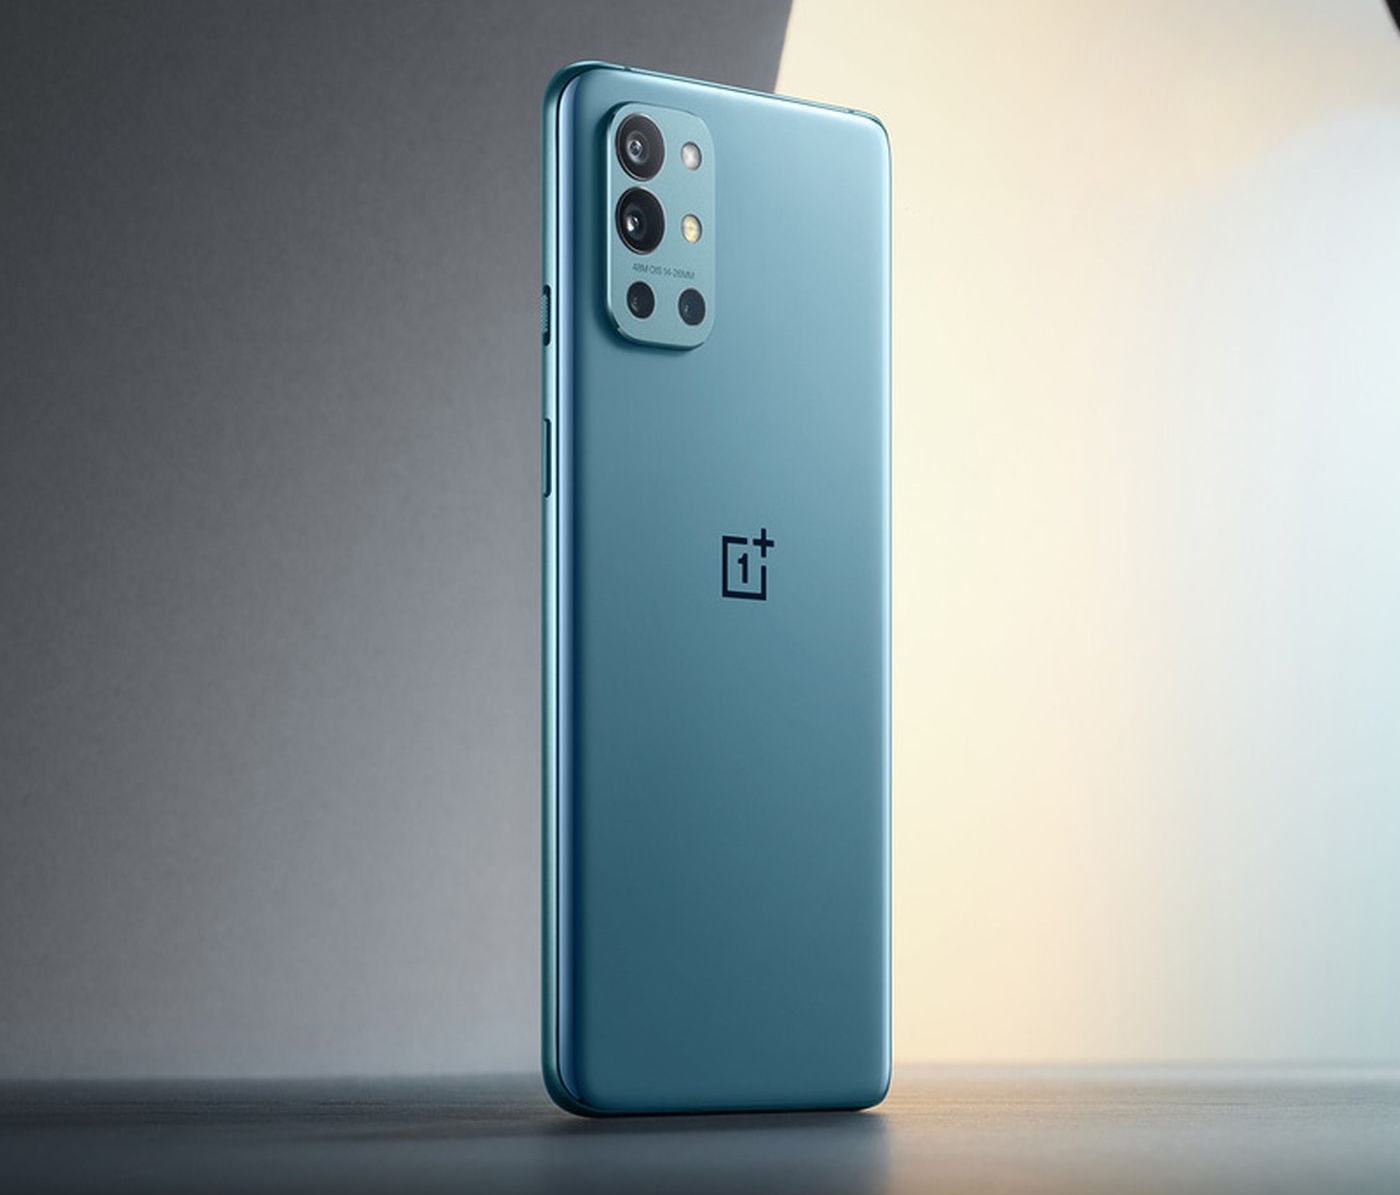 Rumor: OnePlus 9RT will get a gaming version and will be released on October 13